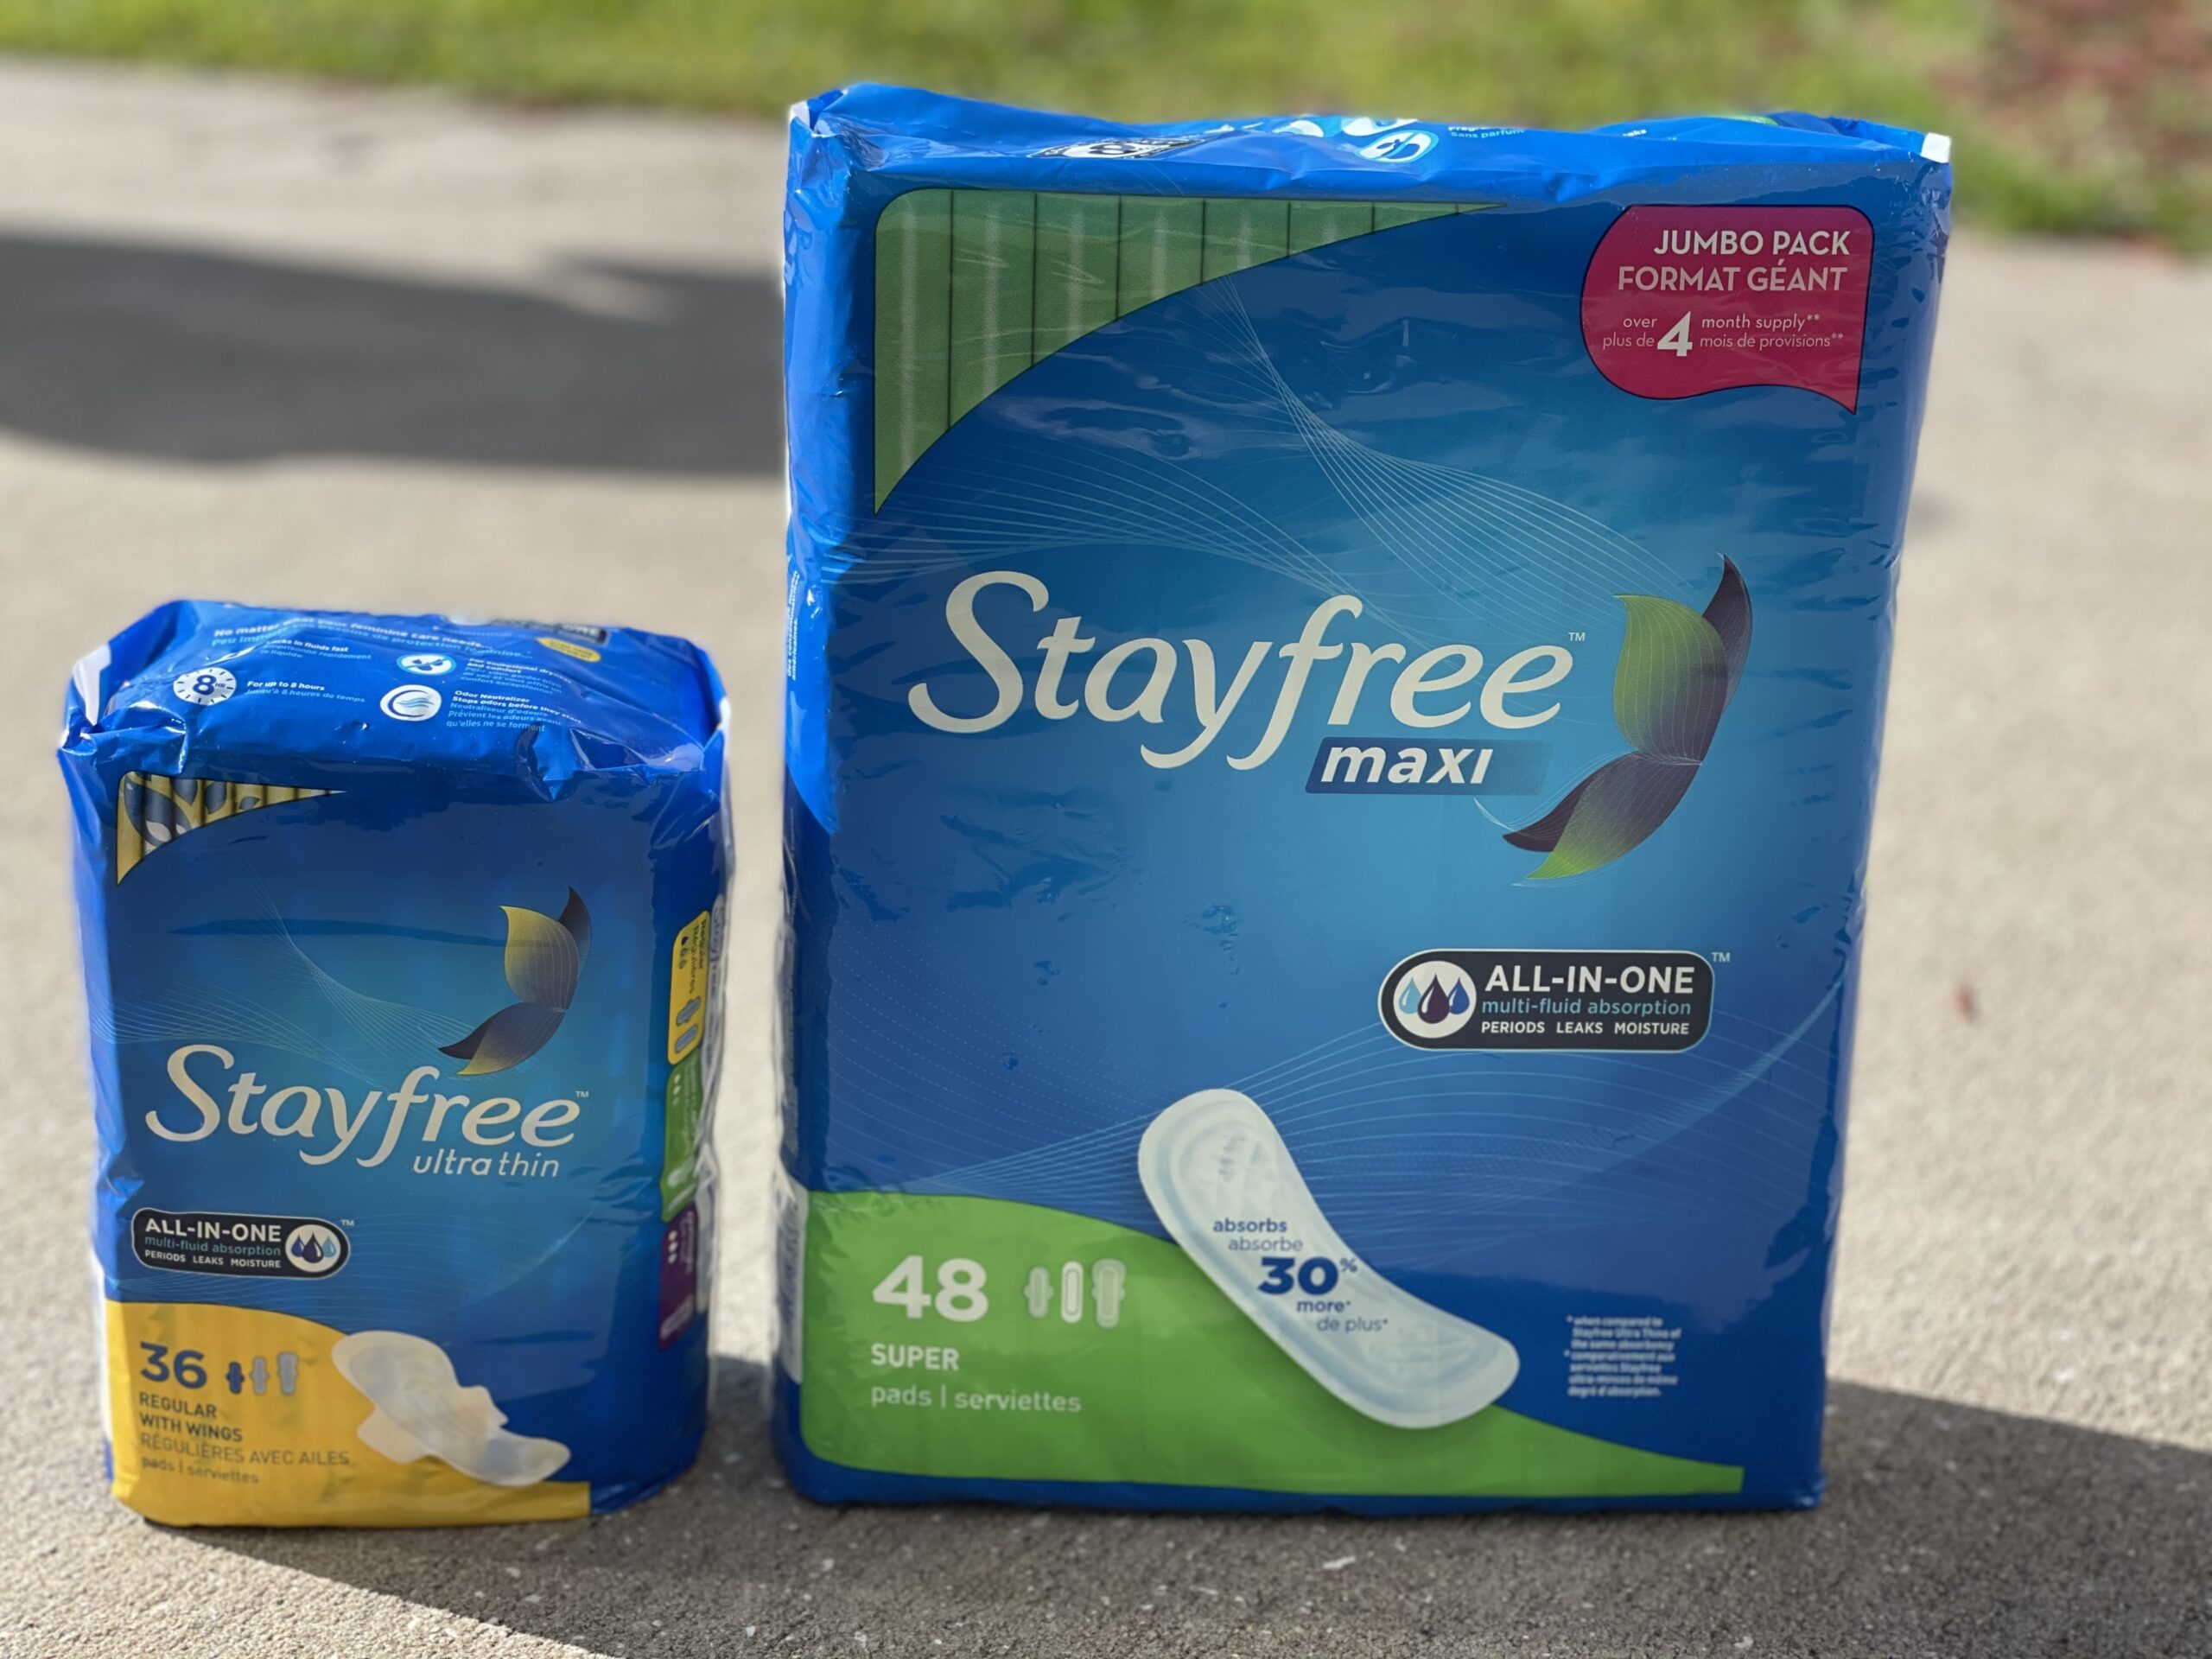 Stayfree, Playtex, Carefree Only $1.69 at Walgreens